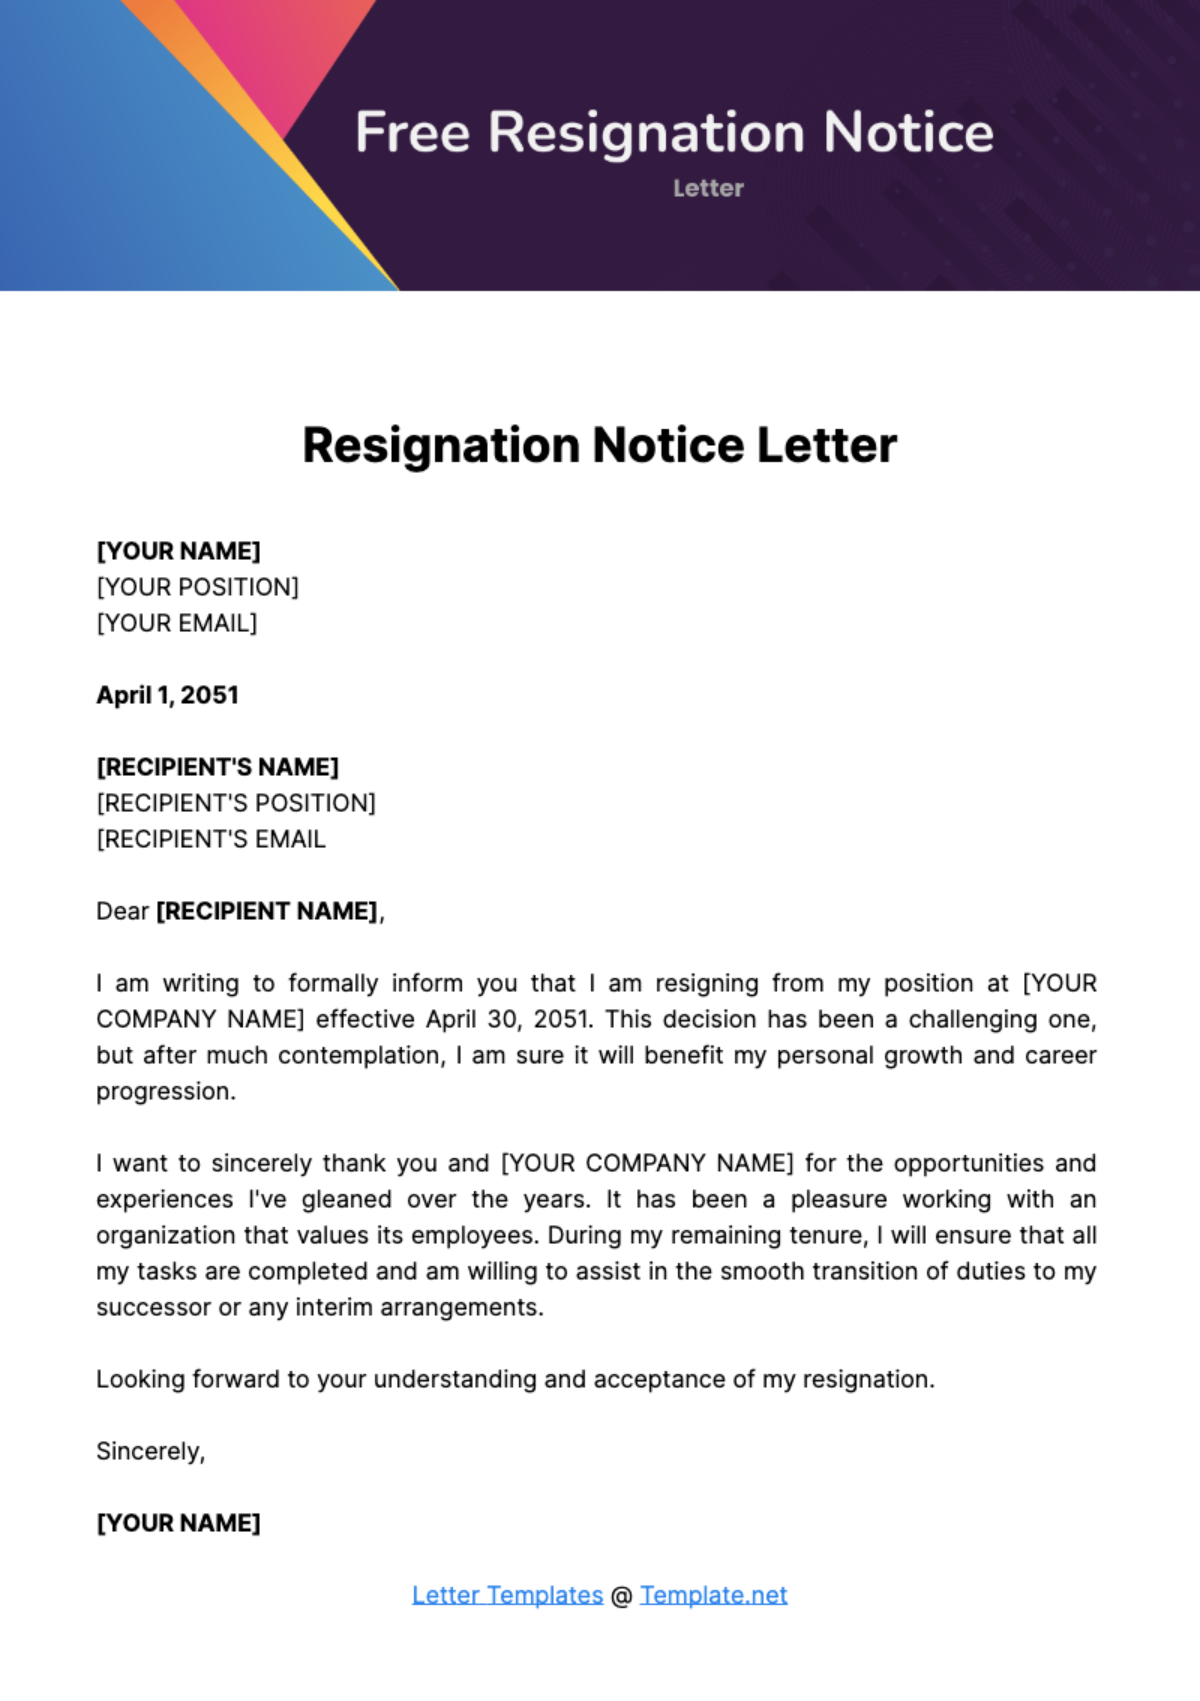 Free Resignation Notice Letter Template